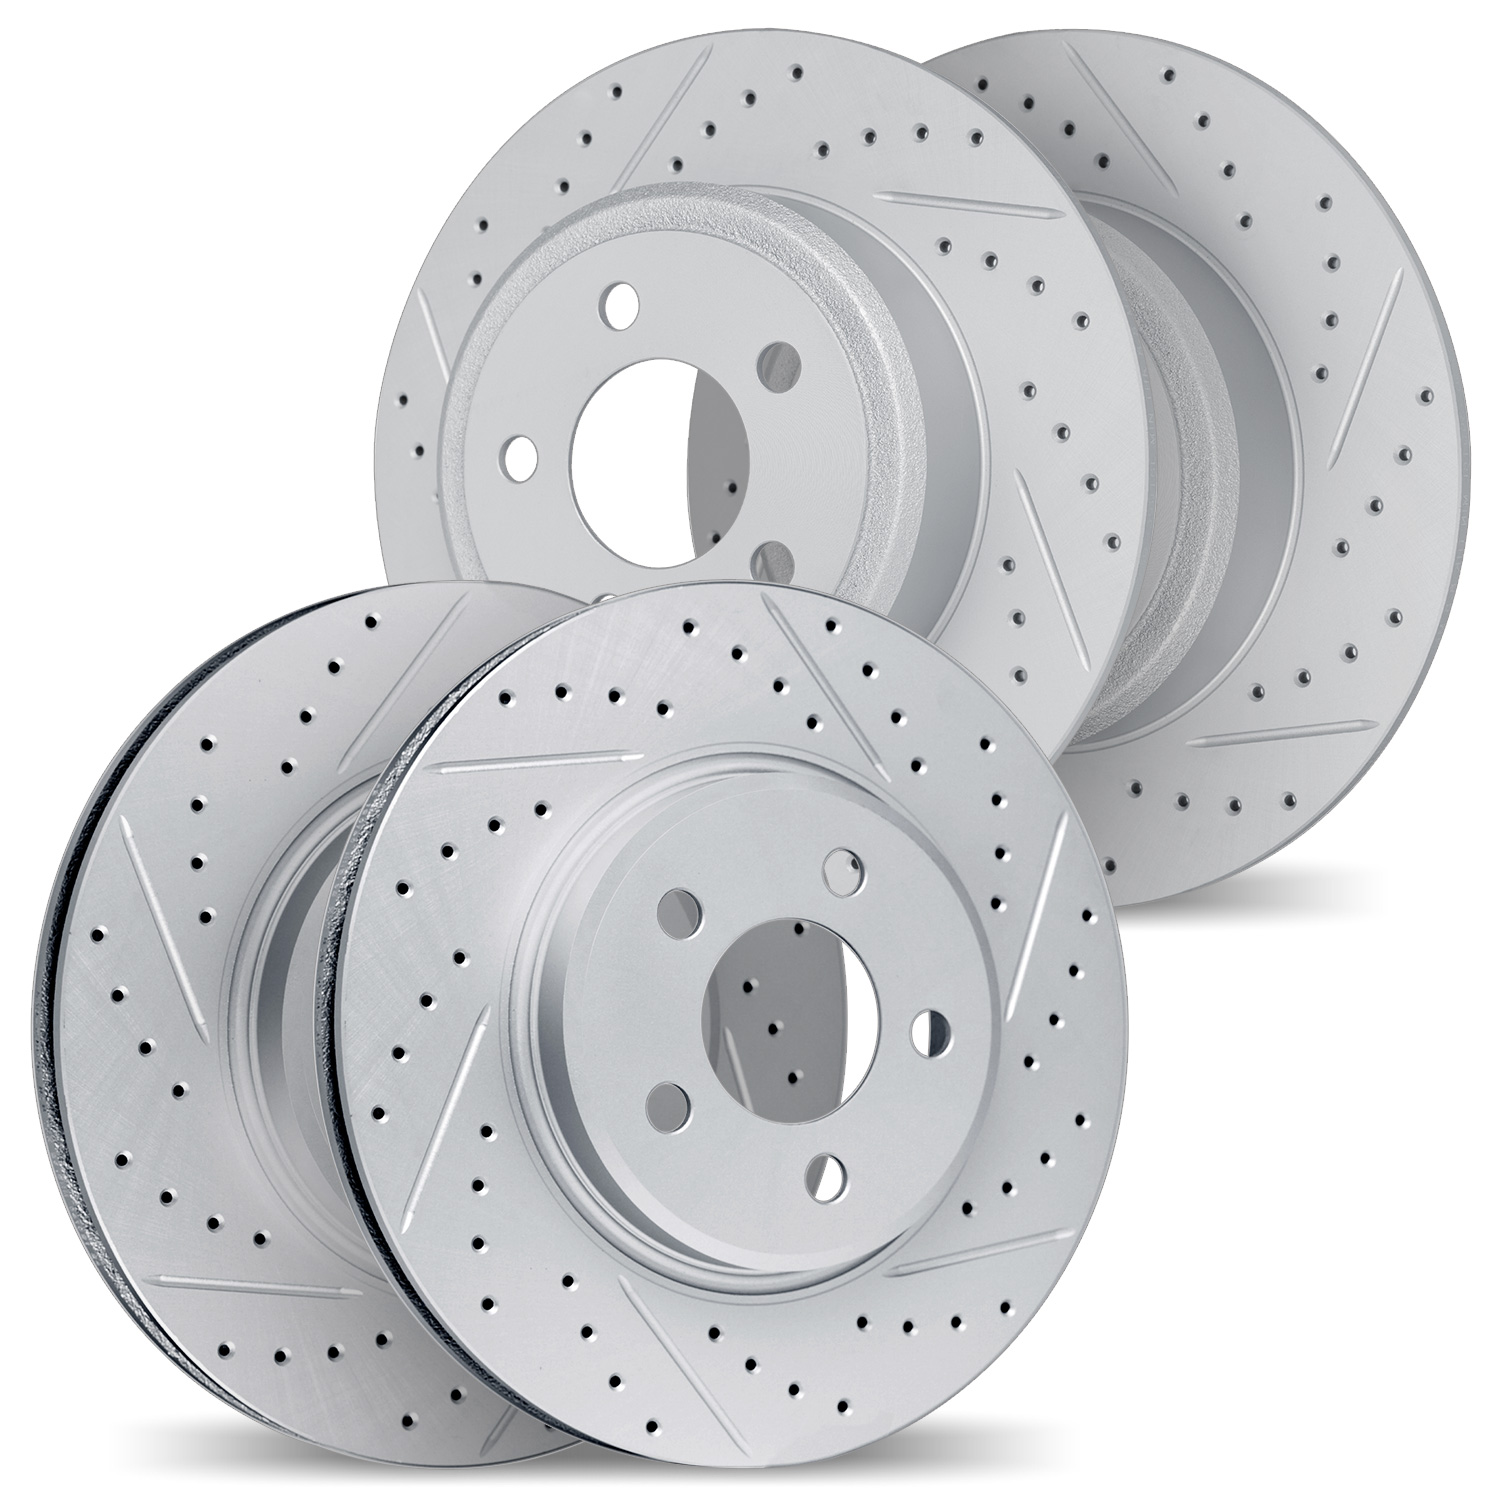 2004-58001 Geoperformance Drilled/Slotted Brake Rotors, 2014-2016 Acura/Honda, Position: Front and Rear